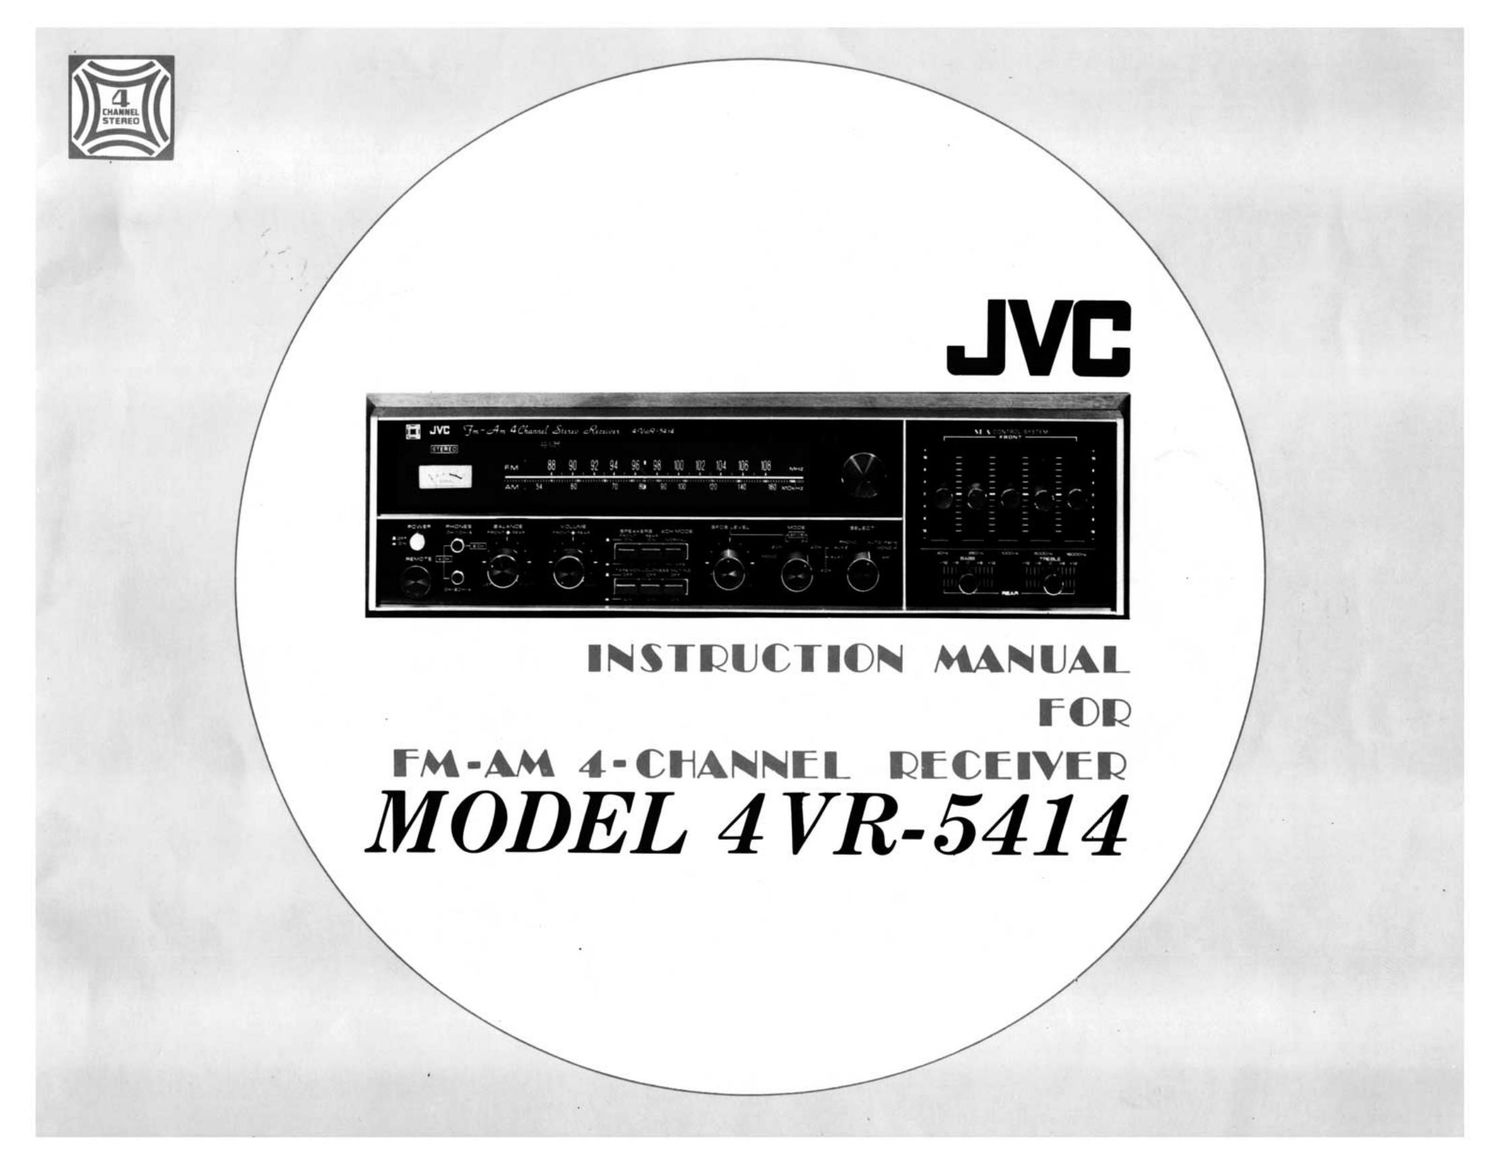 Jvc 4VR 5414 Owners Manual